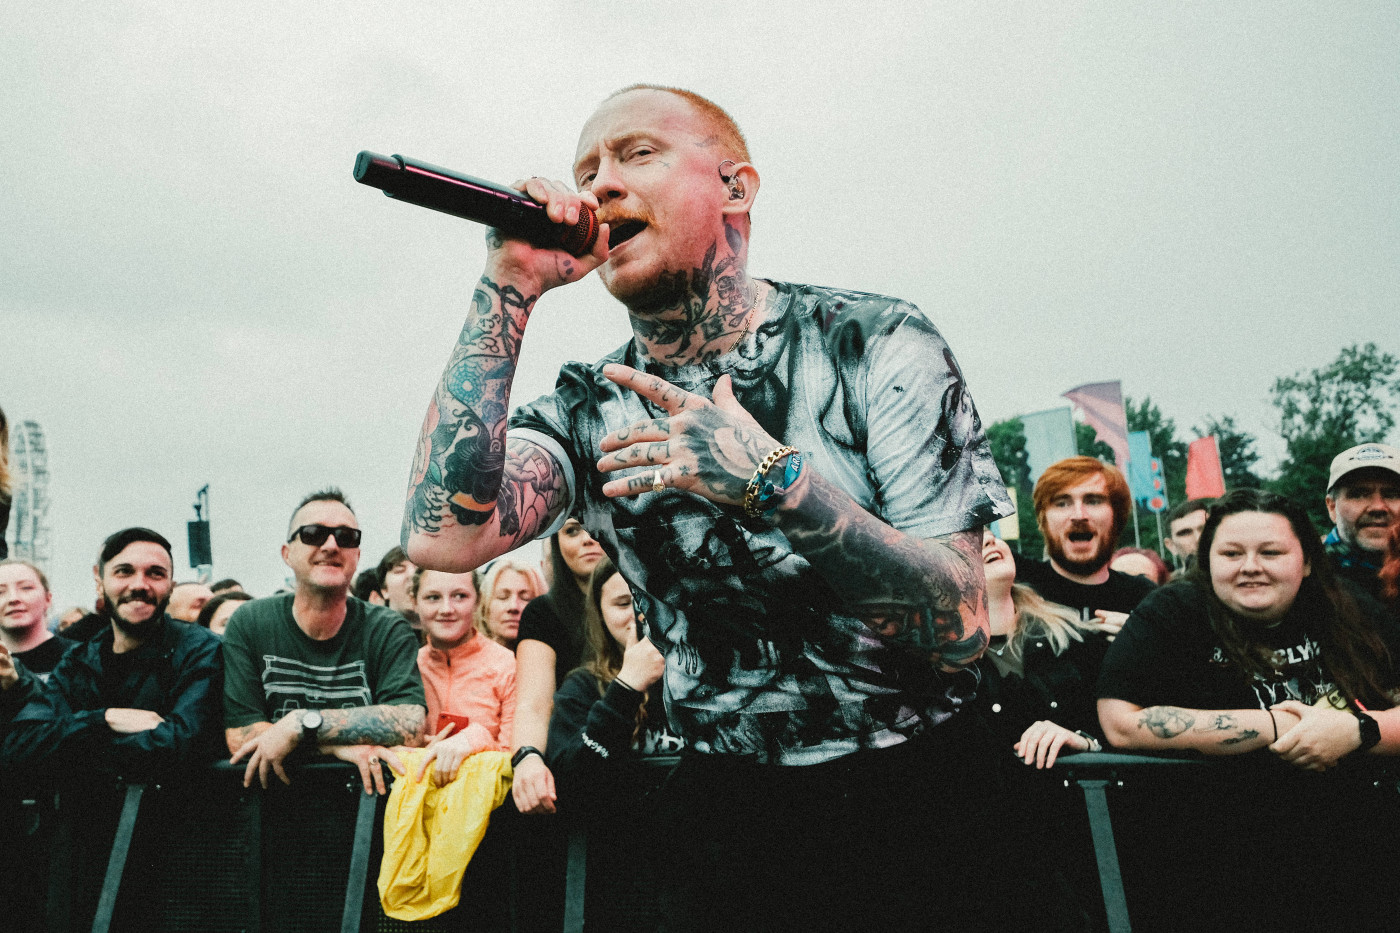 Frank Carter performs at Glasgow Green on 9th September 2021